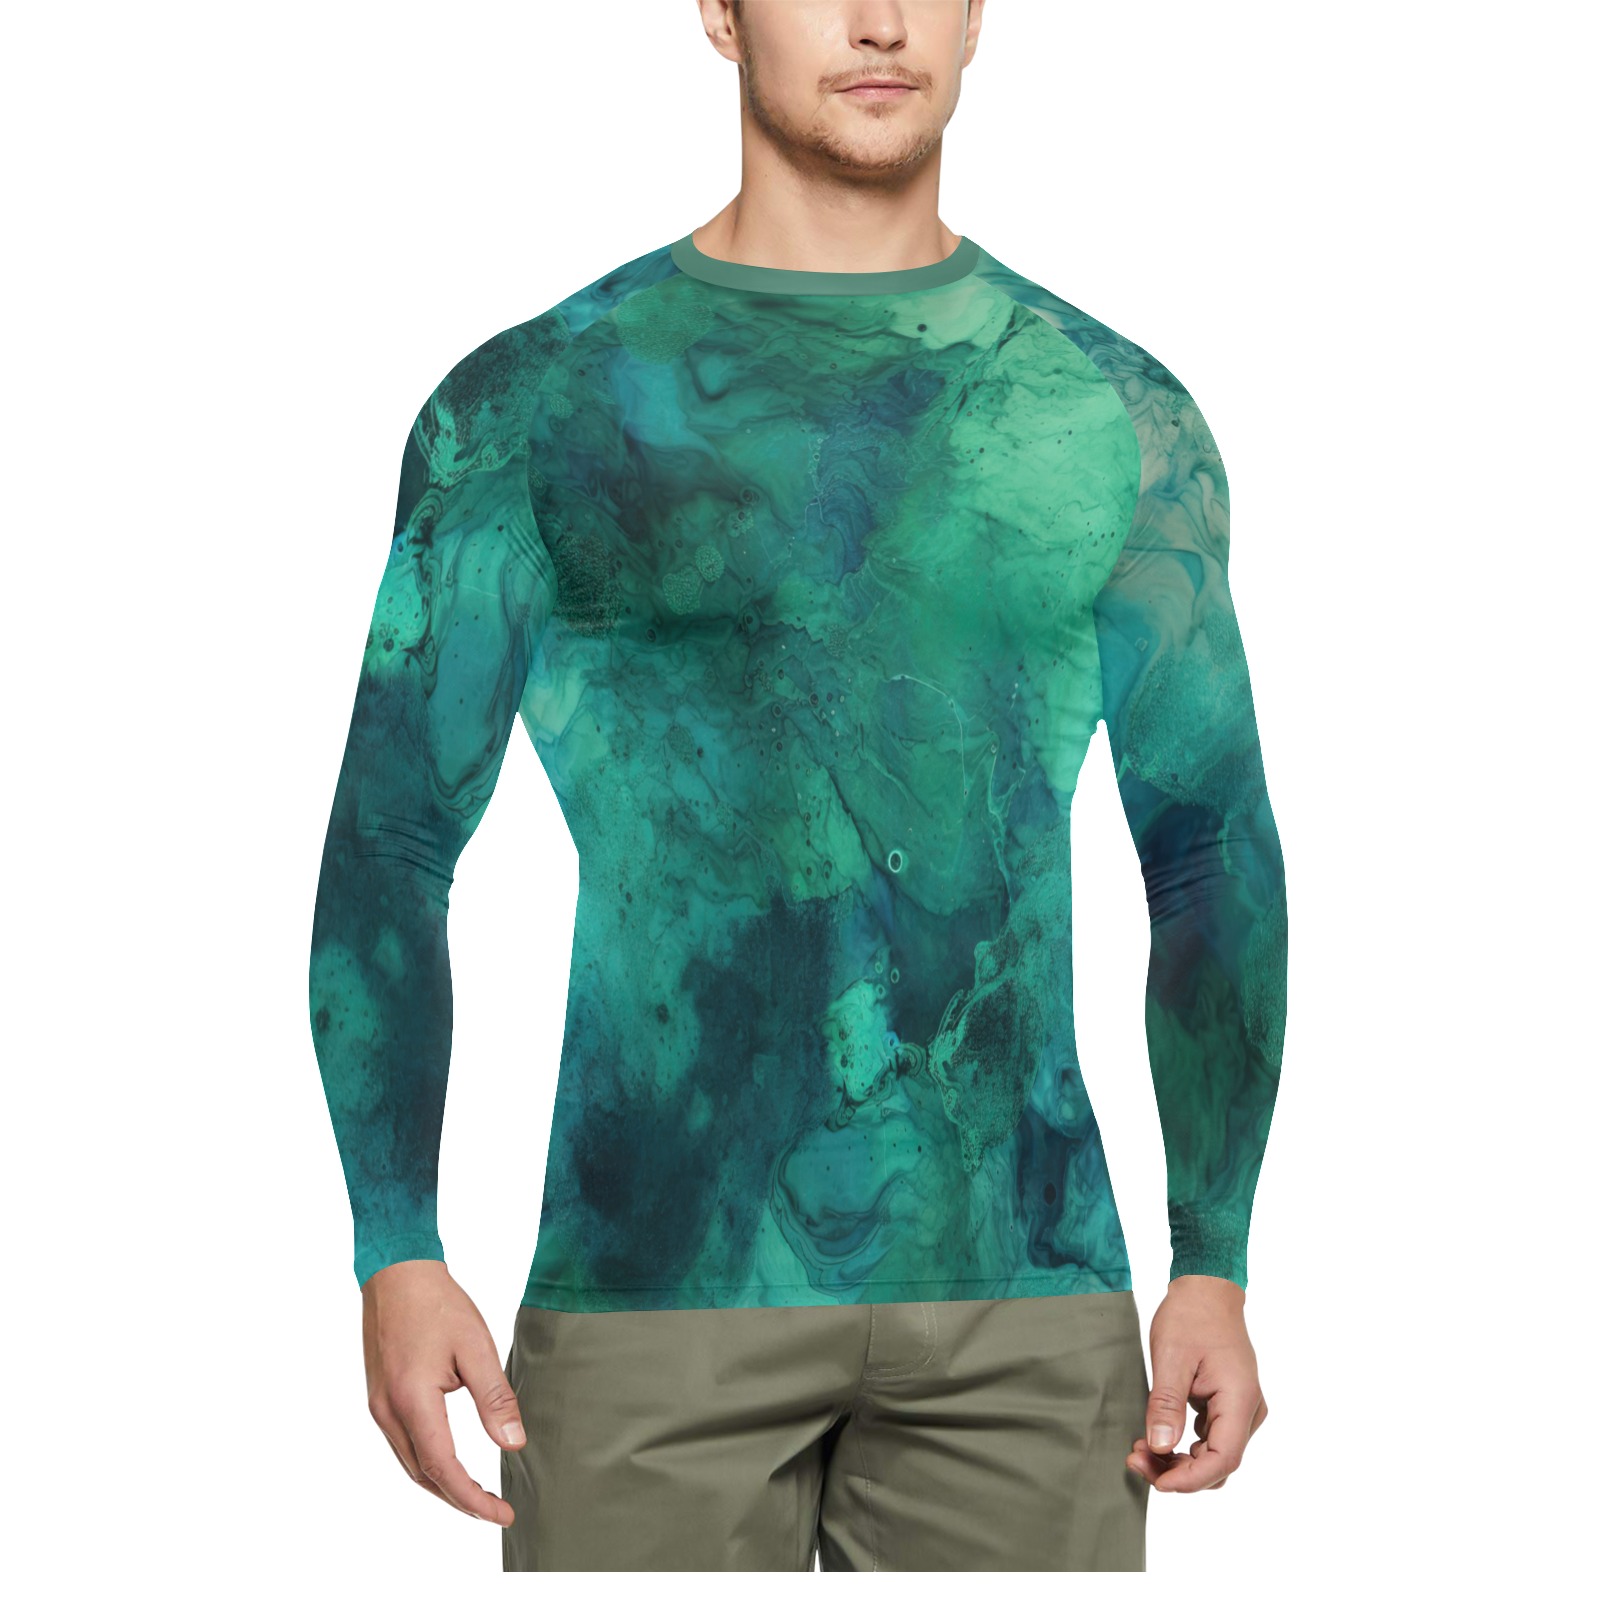 CG_a_green_and_blue_textured_surface_in_the_style_of_fluid_ink__8ea3f316-602e-4f64-bcf8-c283f84ca5b3 Men's Long Sleeve Swim Shirt (Model S39)